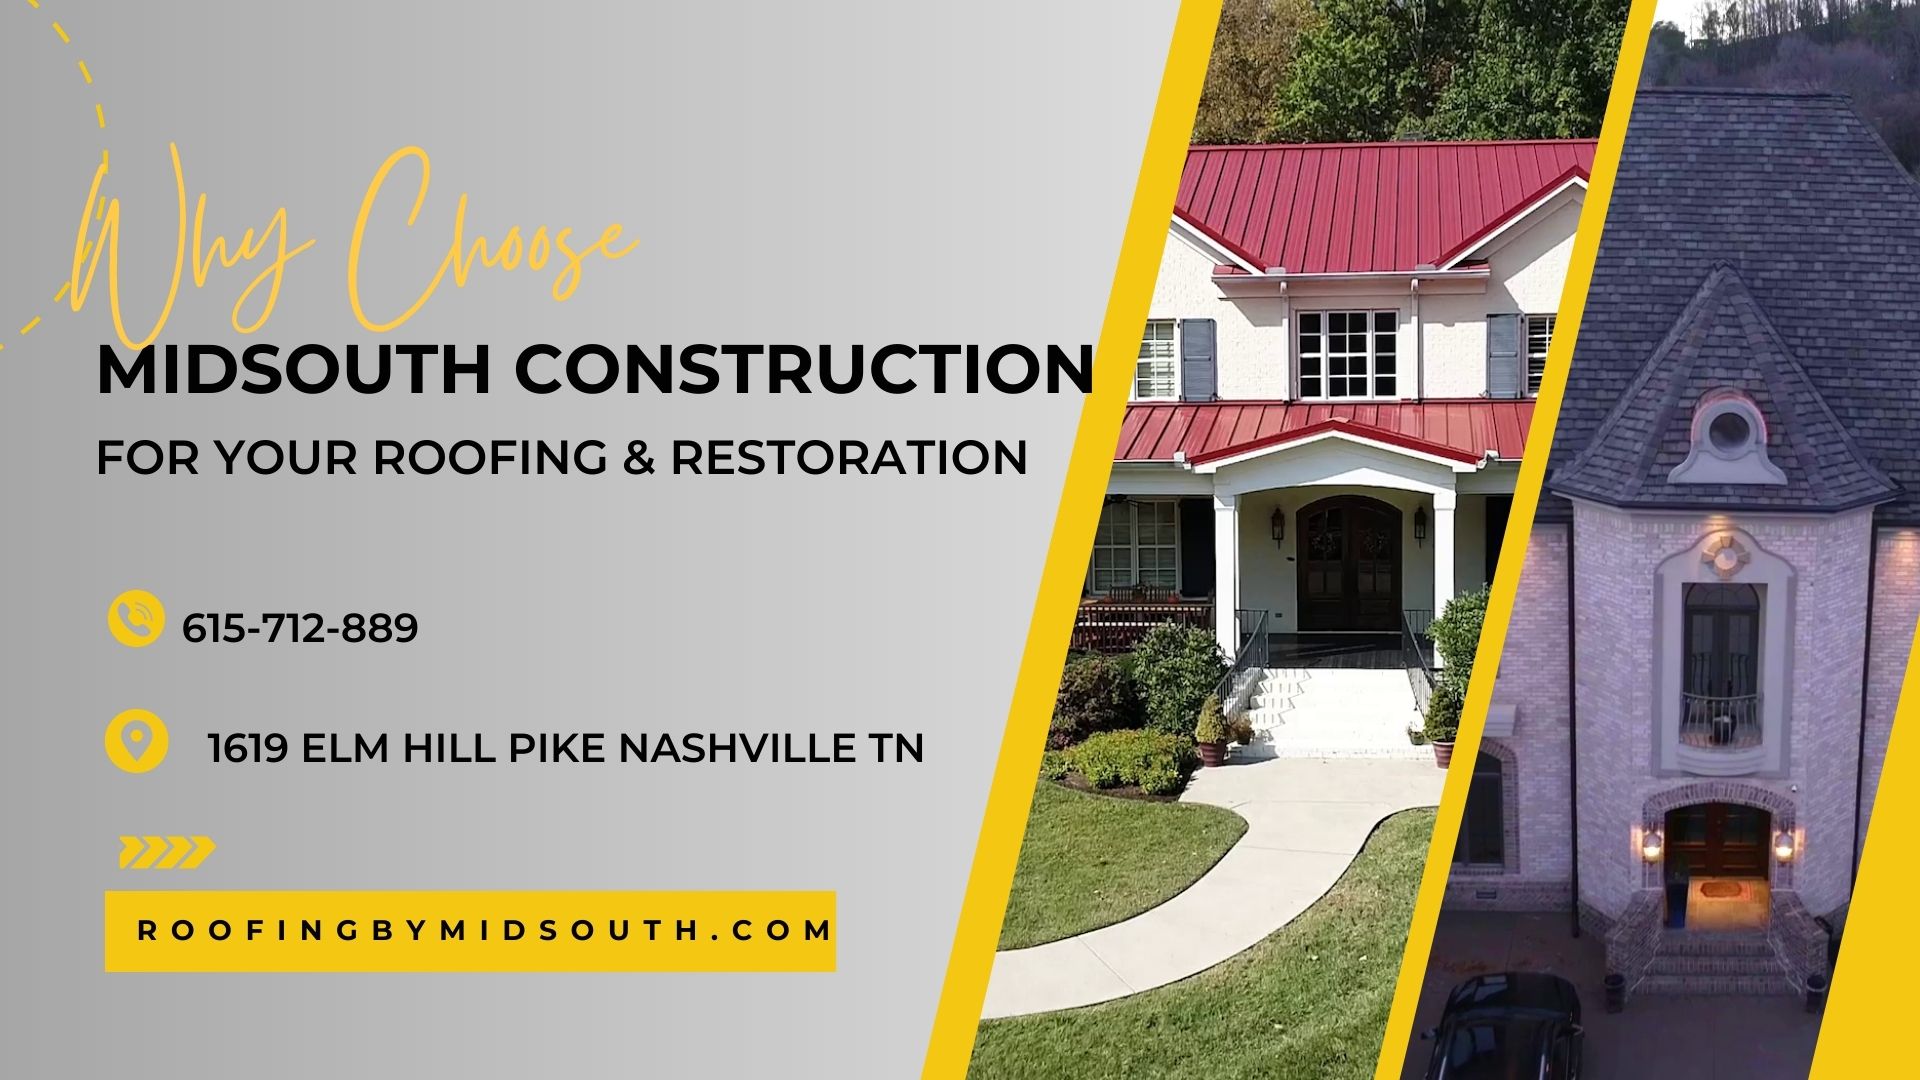 Why Choose MidSouth Construction for your roofing & restoration services